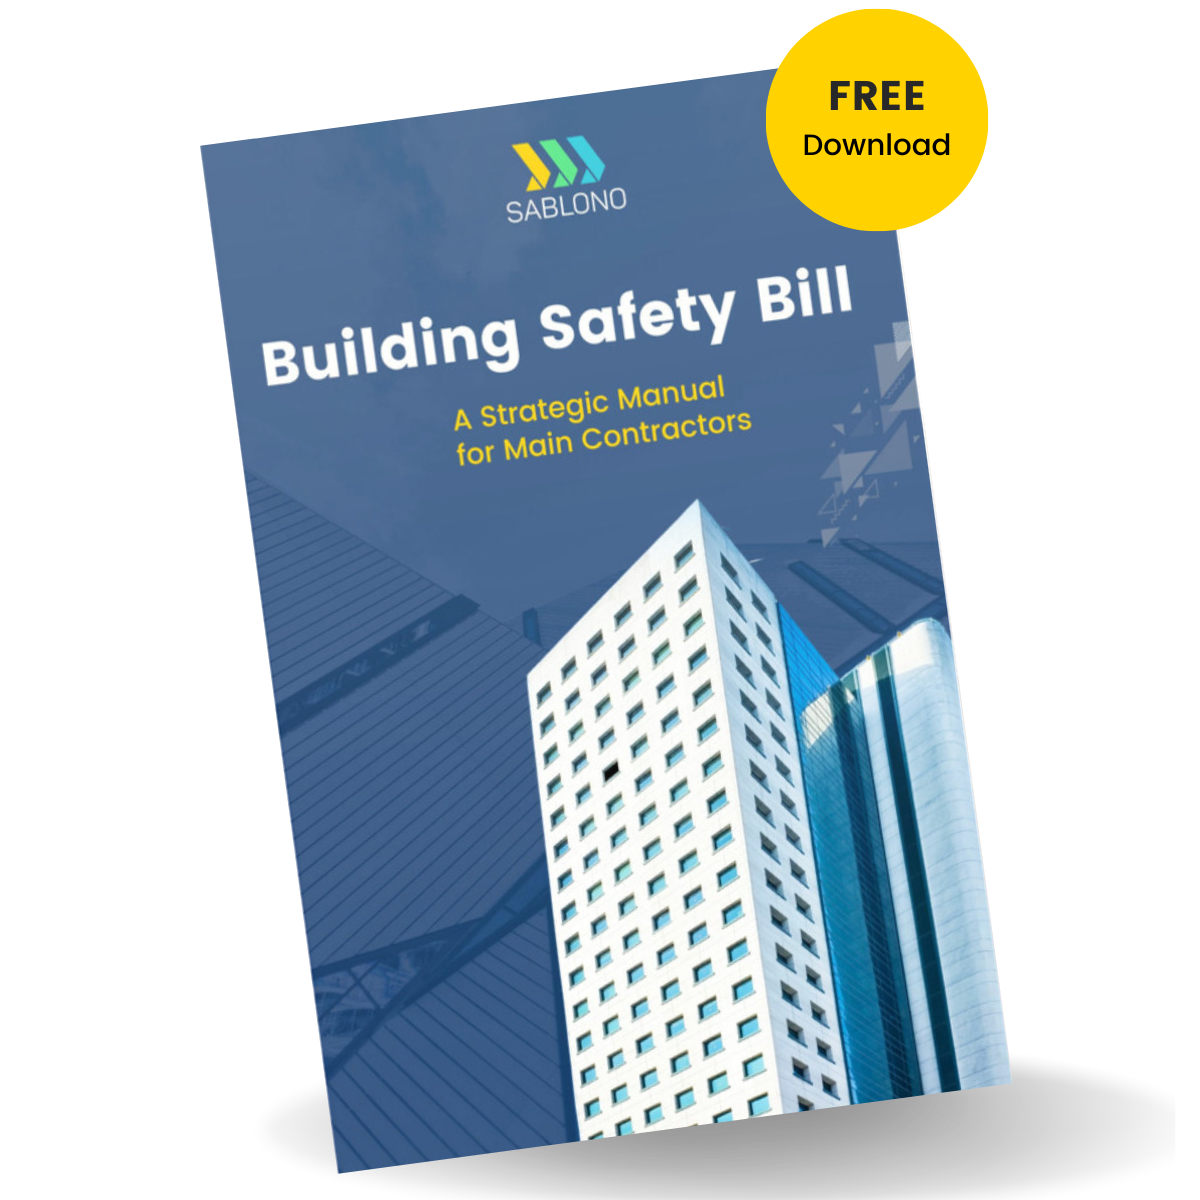 Building Safety Bill guide - residential contractors